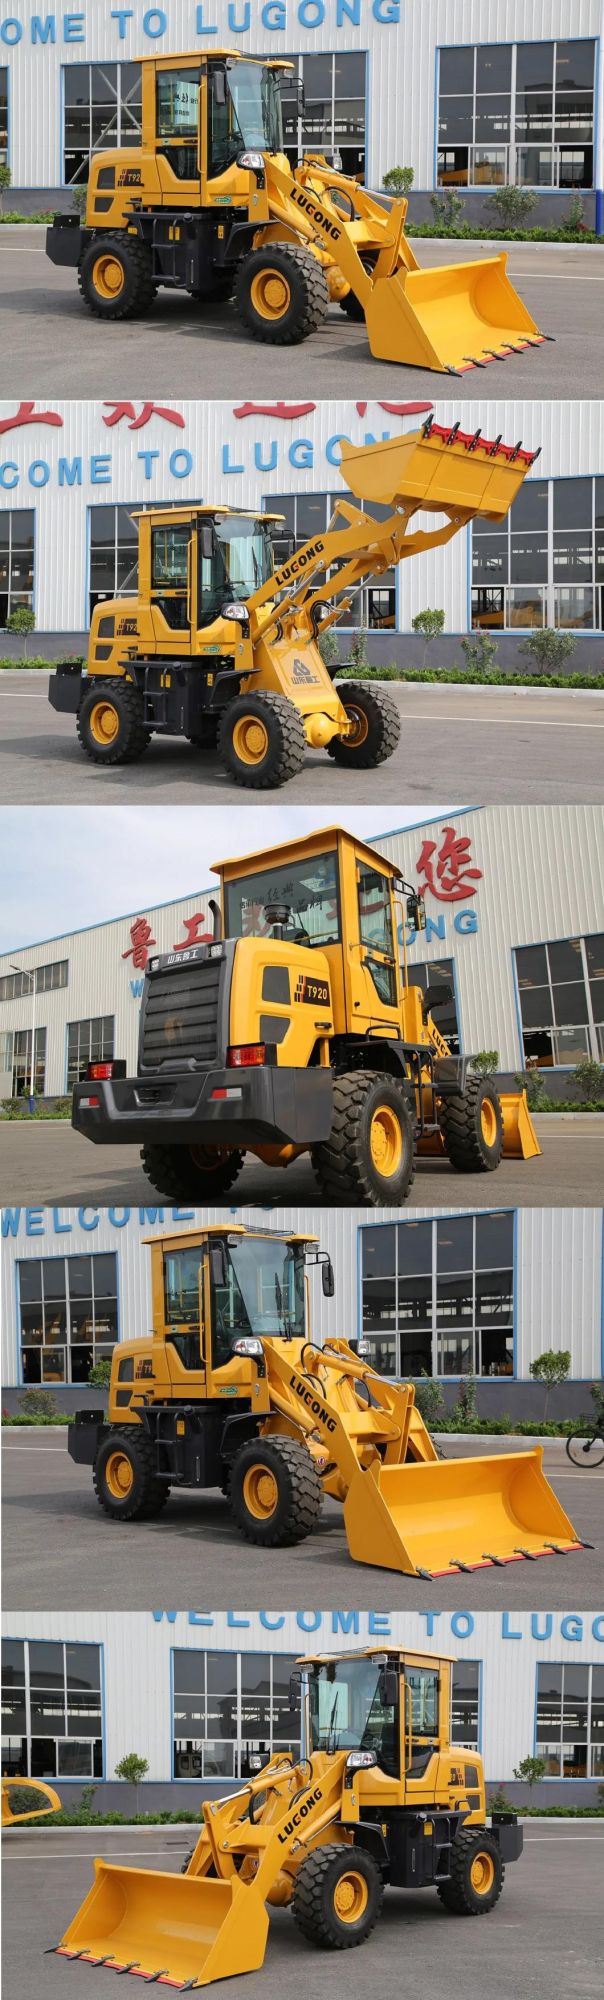 Lugong Compact Good Condition and High Stable Quality T920 Wheel Loader